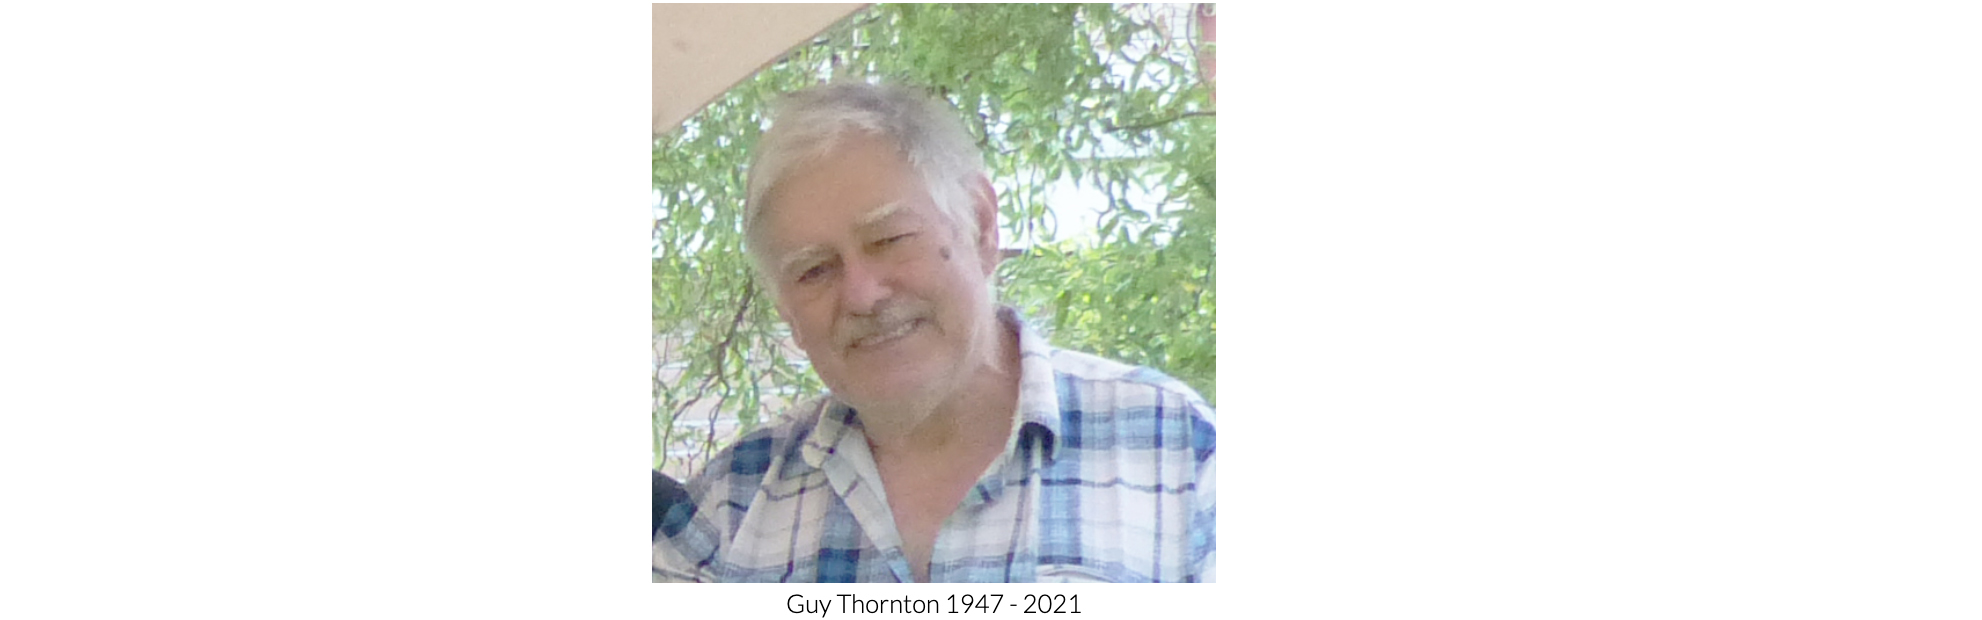 NUJ Netherlands pays tribute to its former chair and founder member Guy Thornton who has died suddenly this week